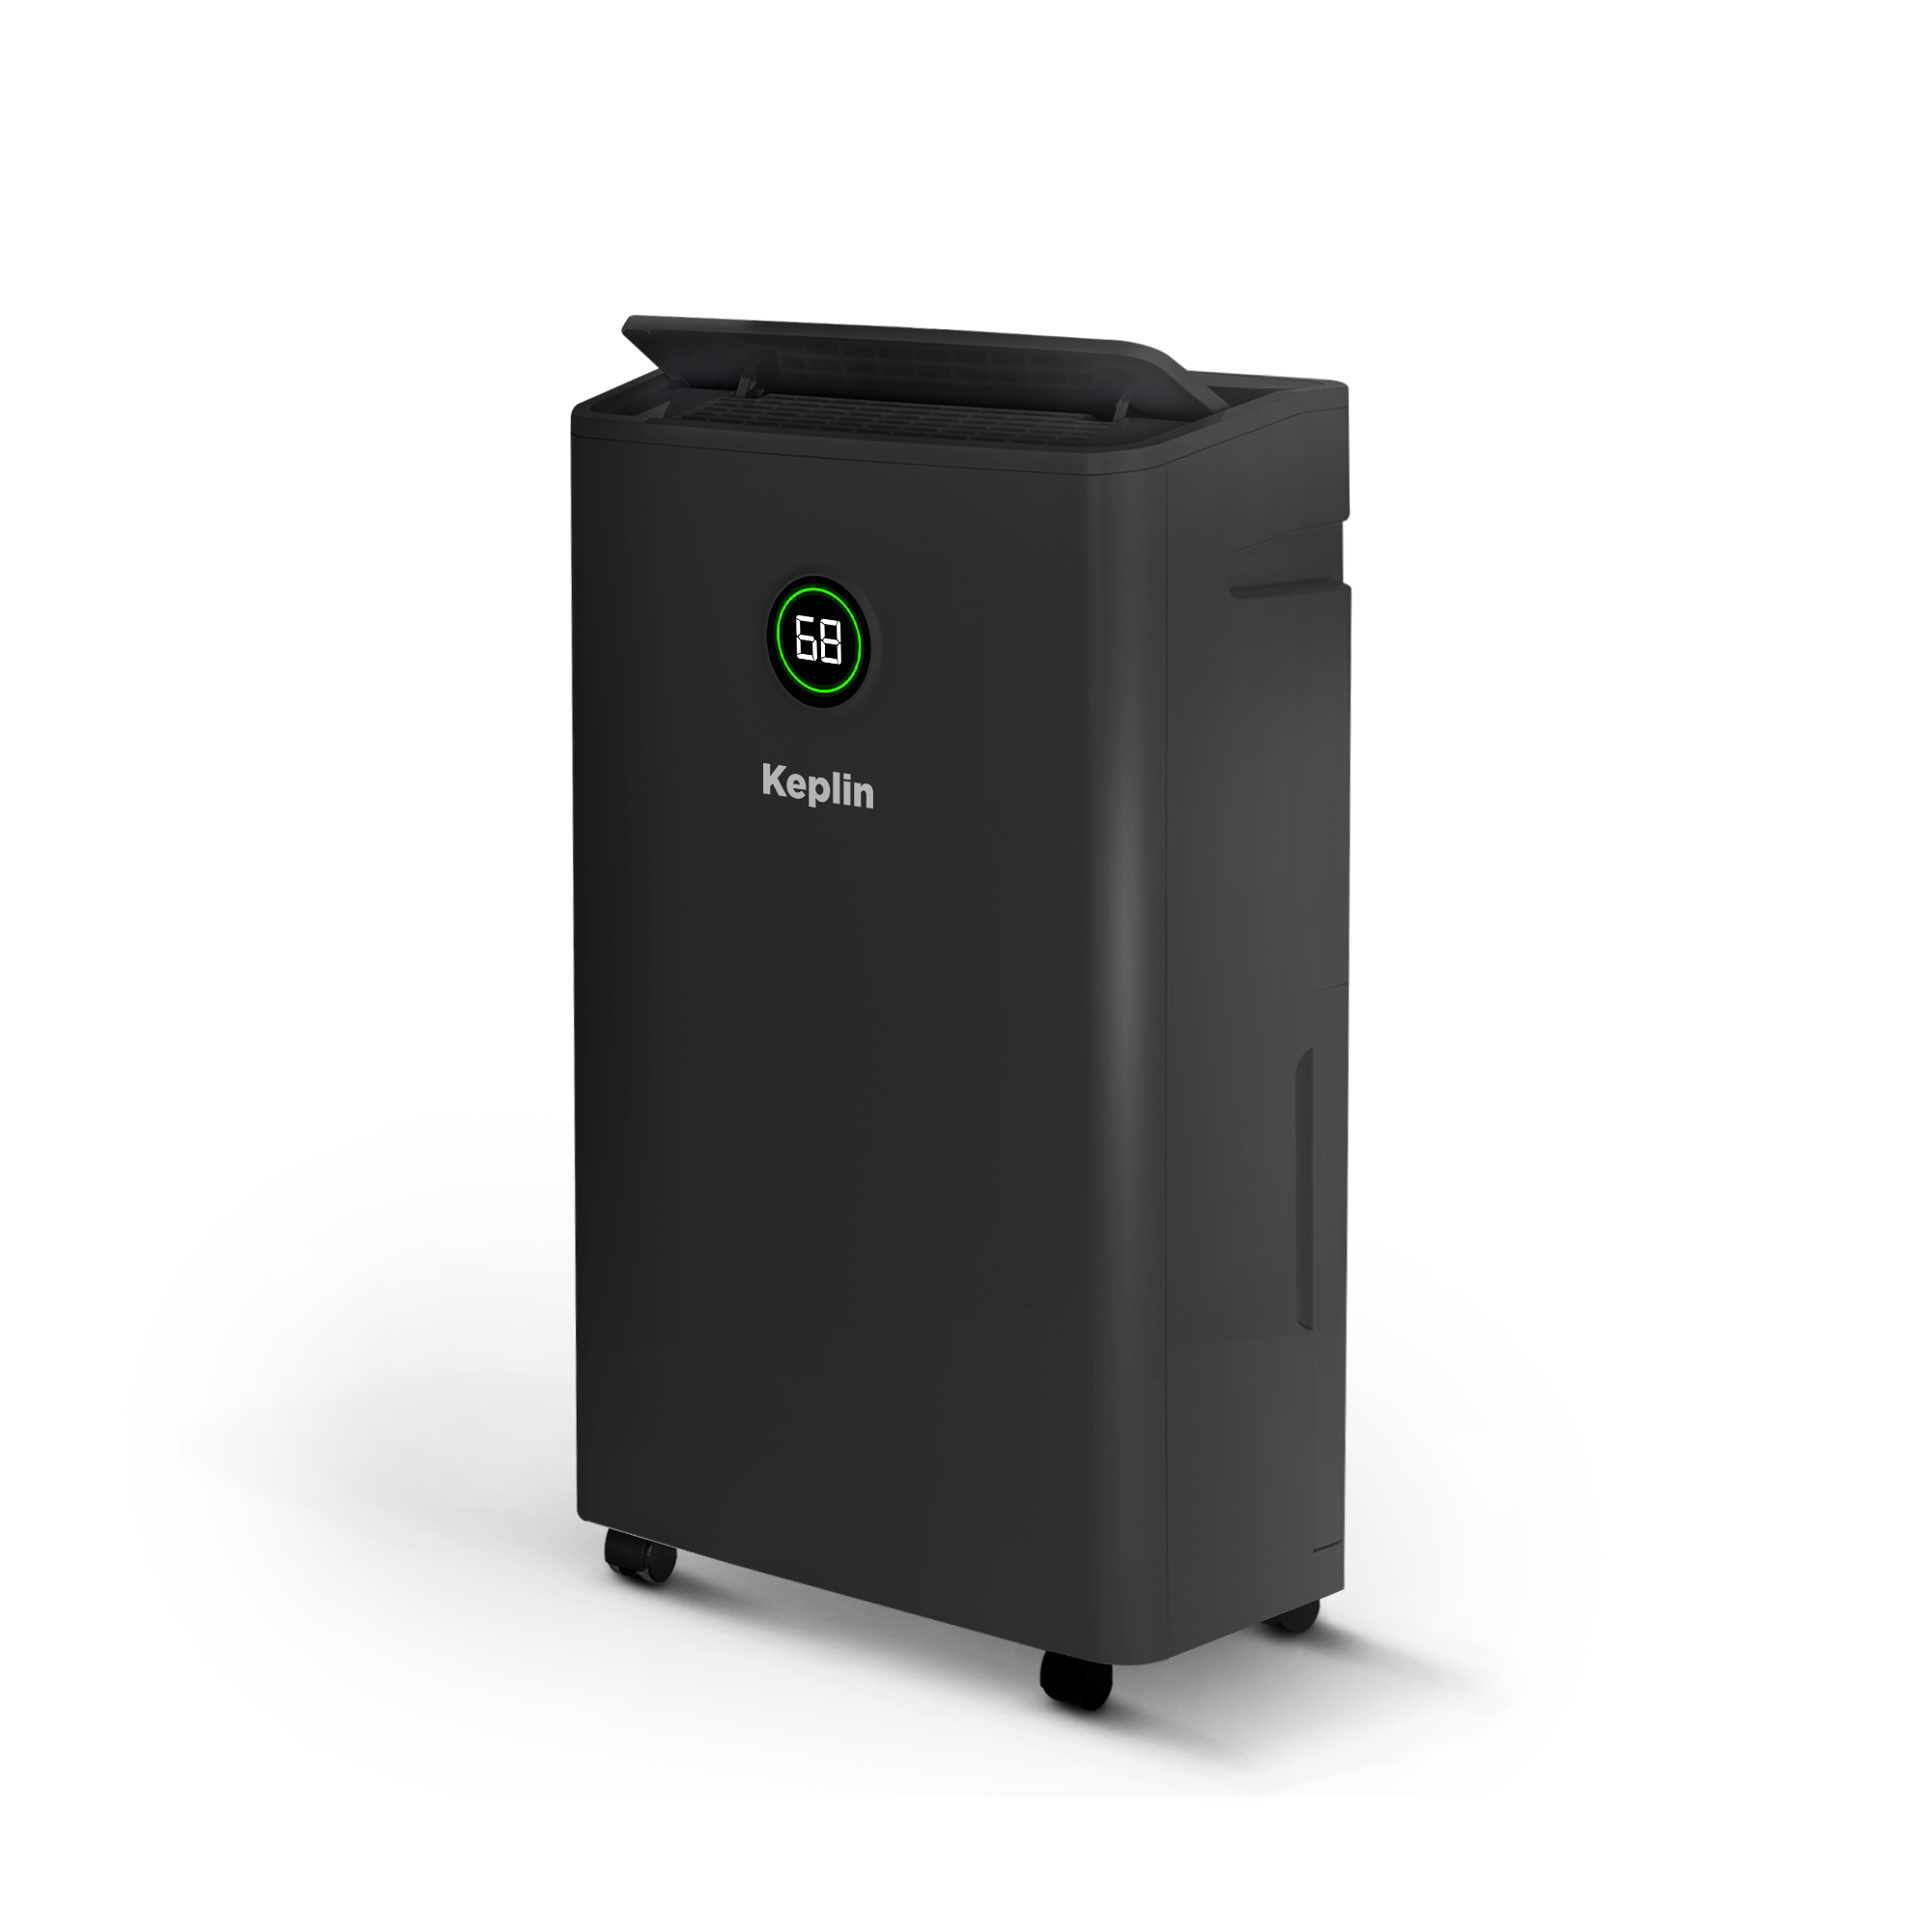 20L Dehumidifier For Clean Air | Mold | Dry Cloth - Continuous Drainage, 24 Hour Timer, & Digital Display